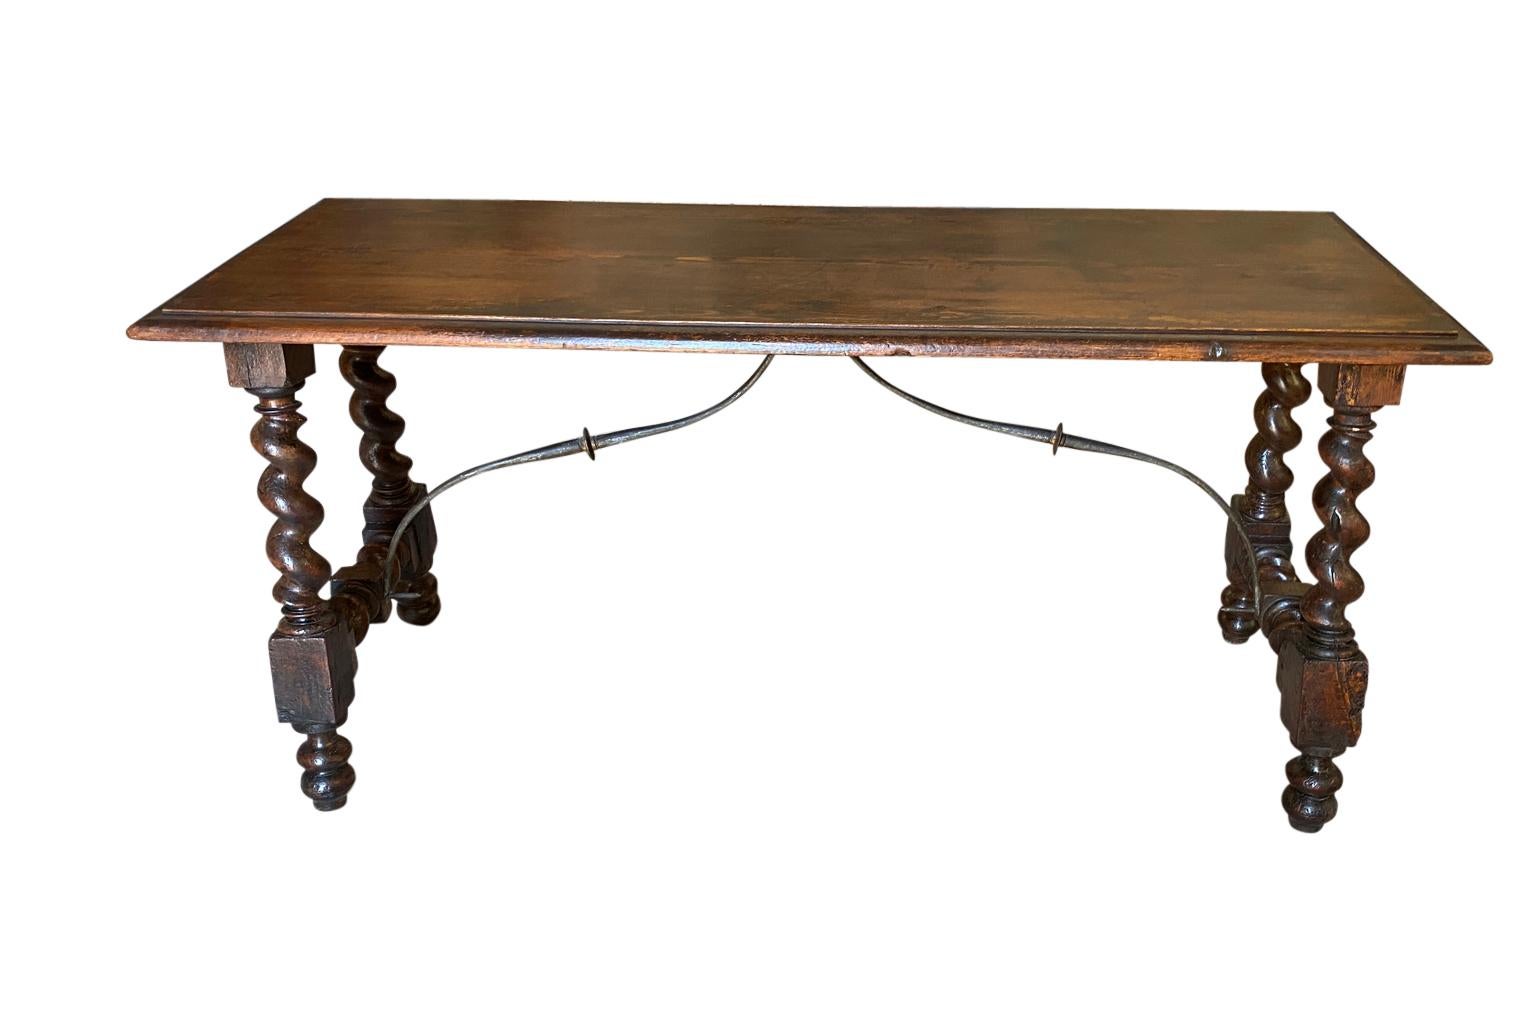 A very handsome mid-19th century Louis XIII style console table constructed from walnut and richly stained pine with beautifully turned legs, iron stretchers and a lovely edge finish to the top.